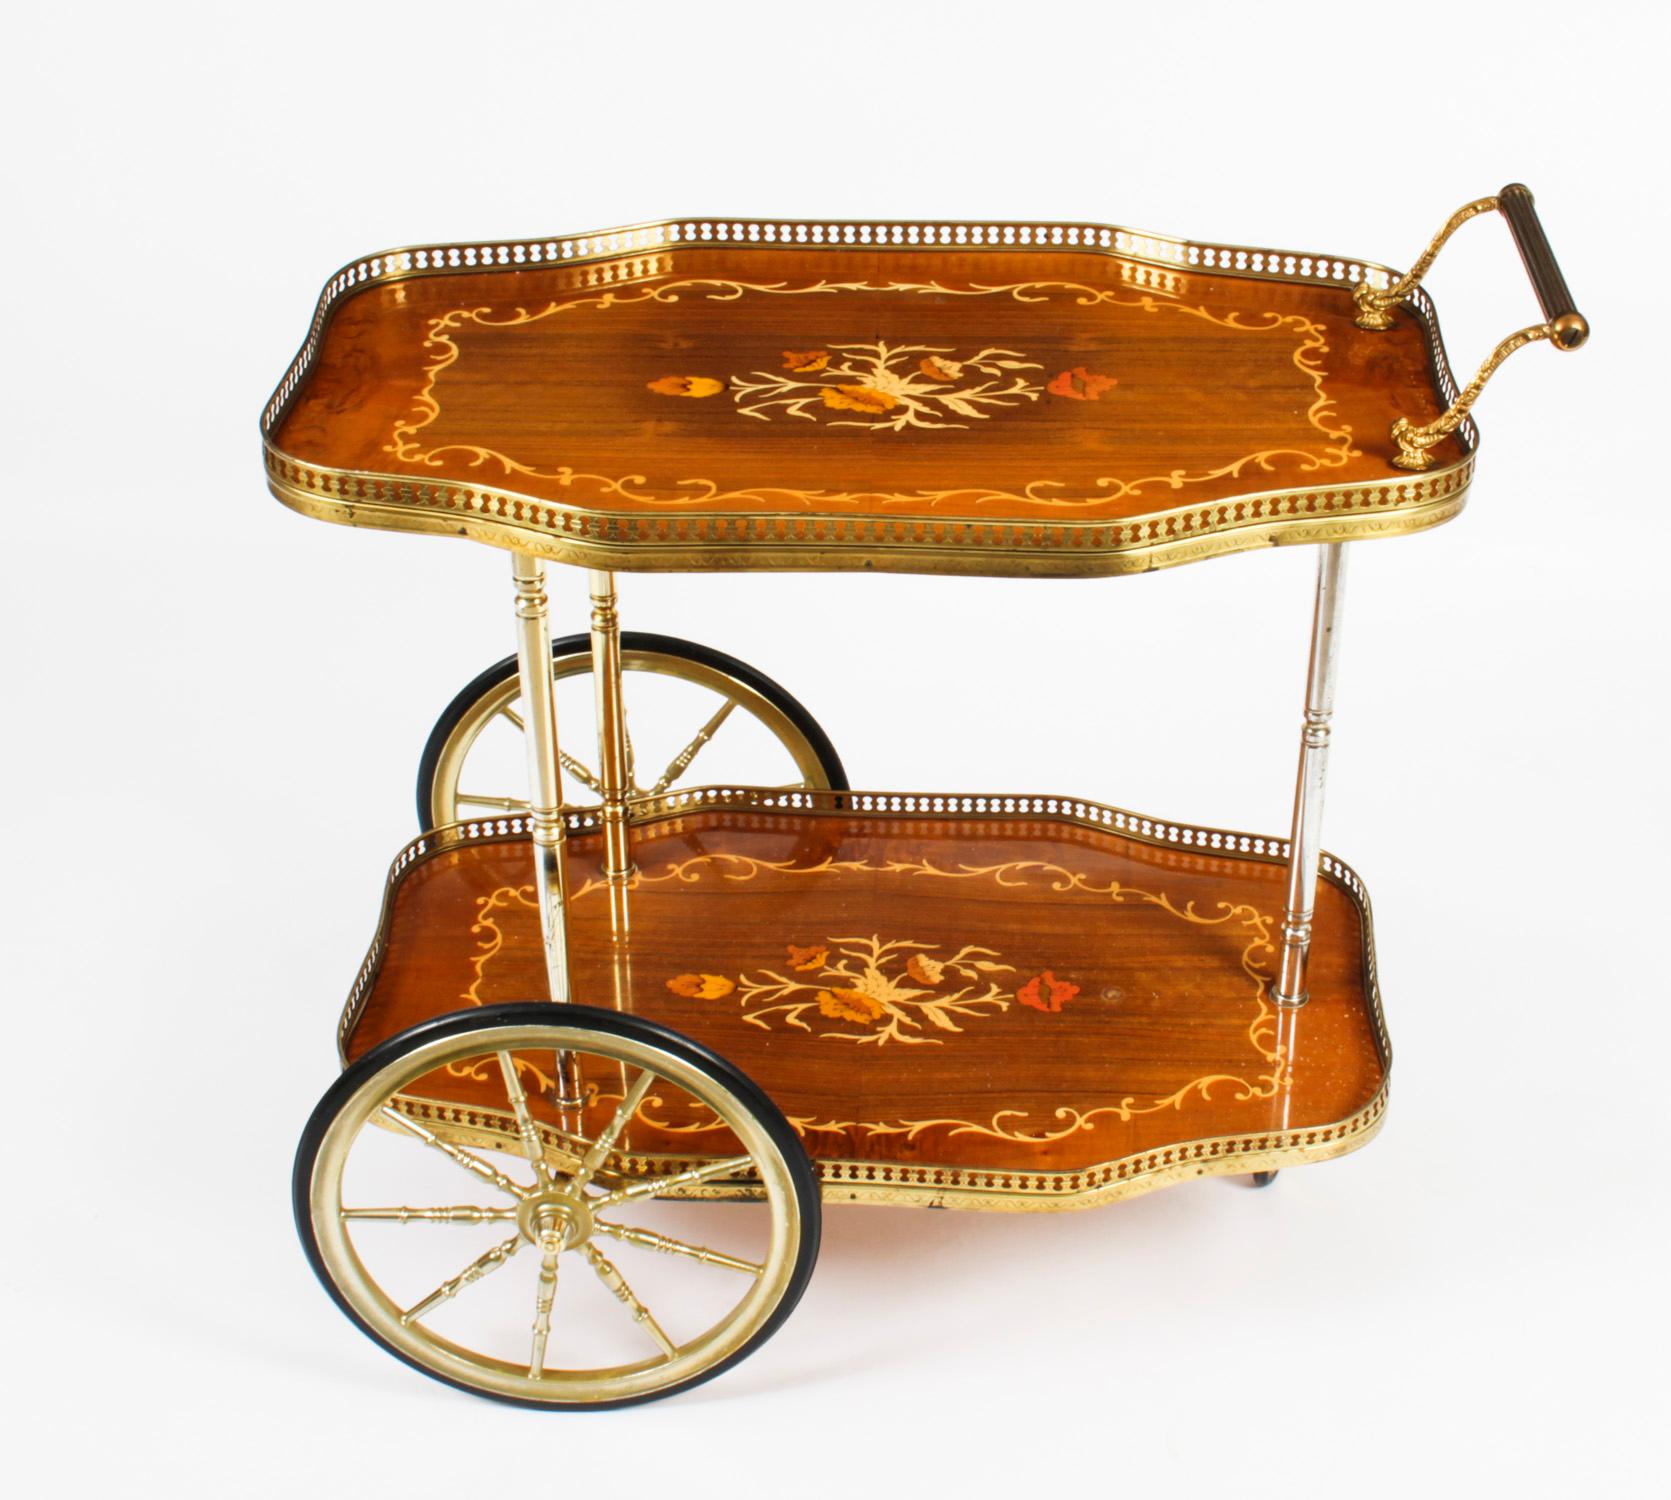 This is a very entertaining vintage mid century Italian Sorrento drinks trolley.

The two tier trolley is very decorative, with floral marquetry decoration, galleried ormolu borders, and handle.

Add some flair to your entertaining experience